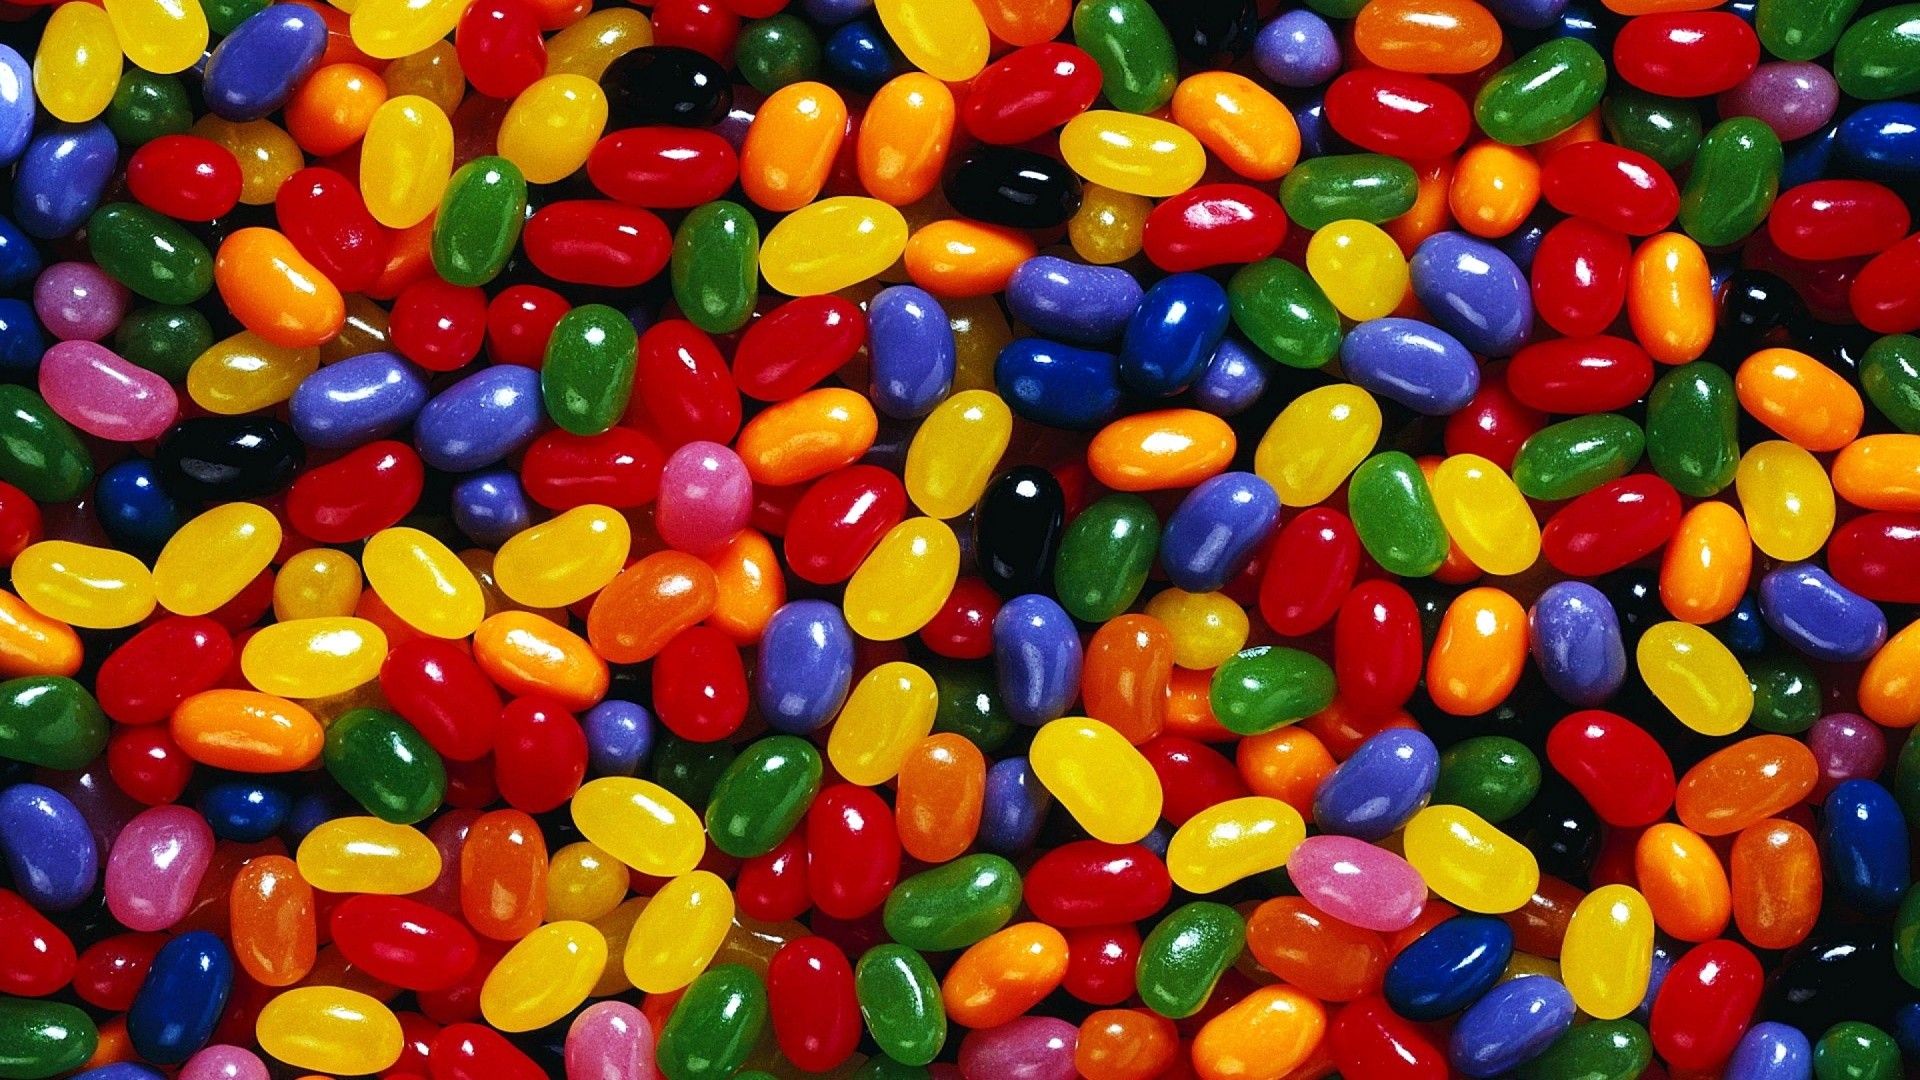 Jelly Bean Wallpapers.